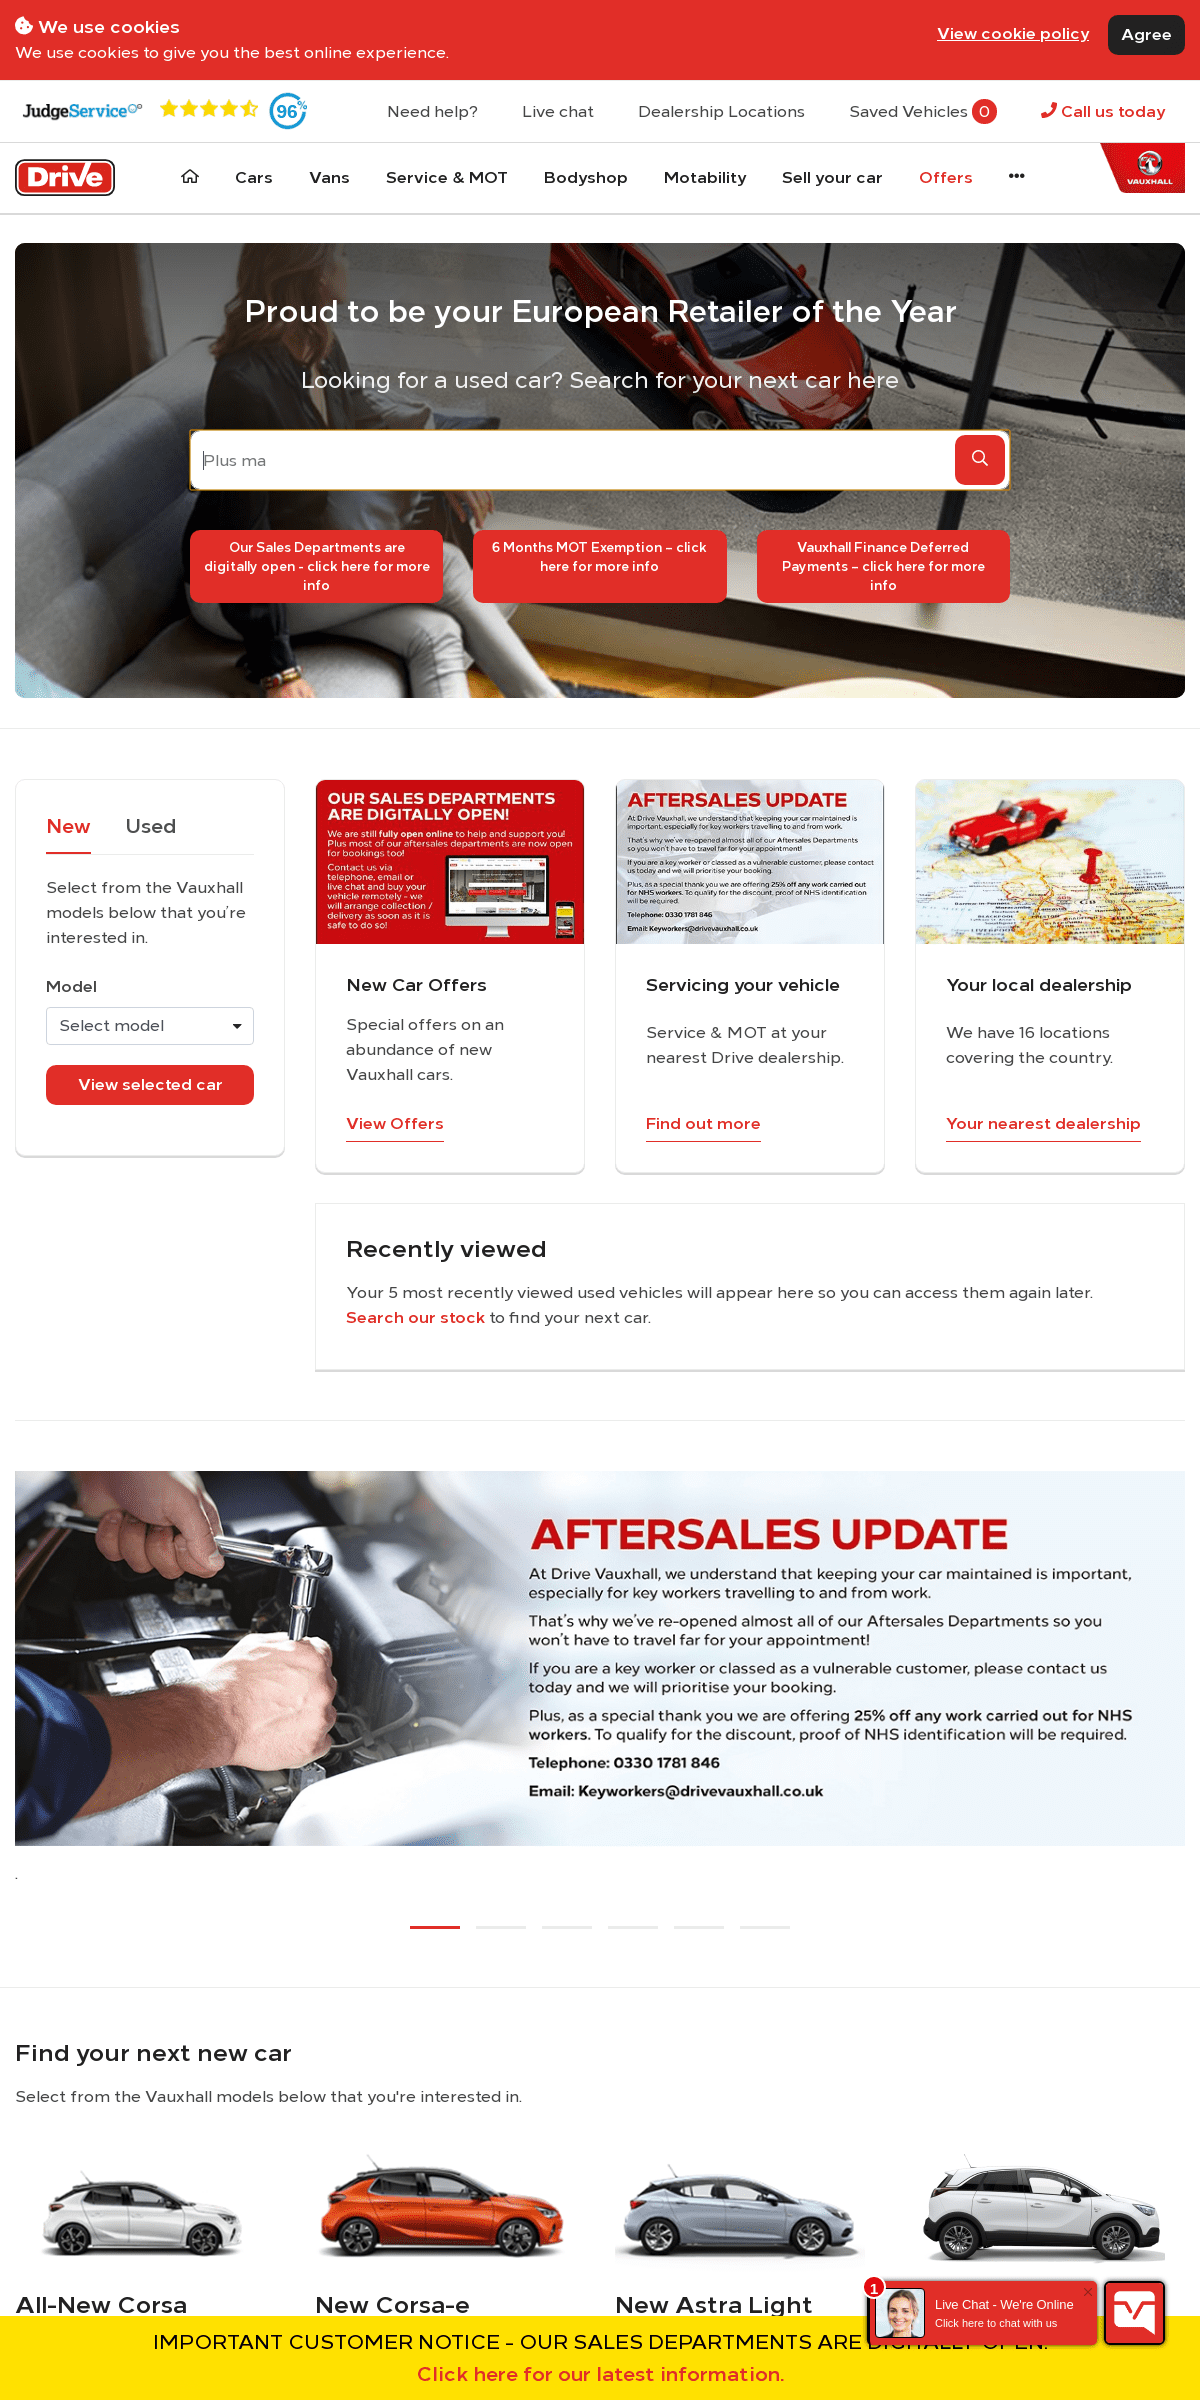 A complete backup of drivevauxhall.co.uk